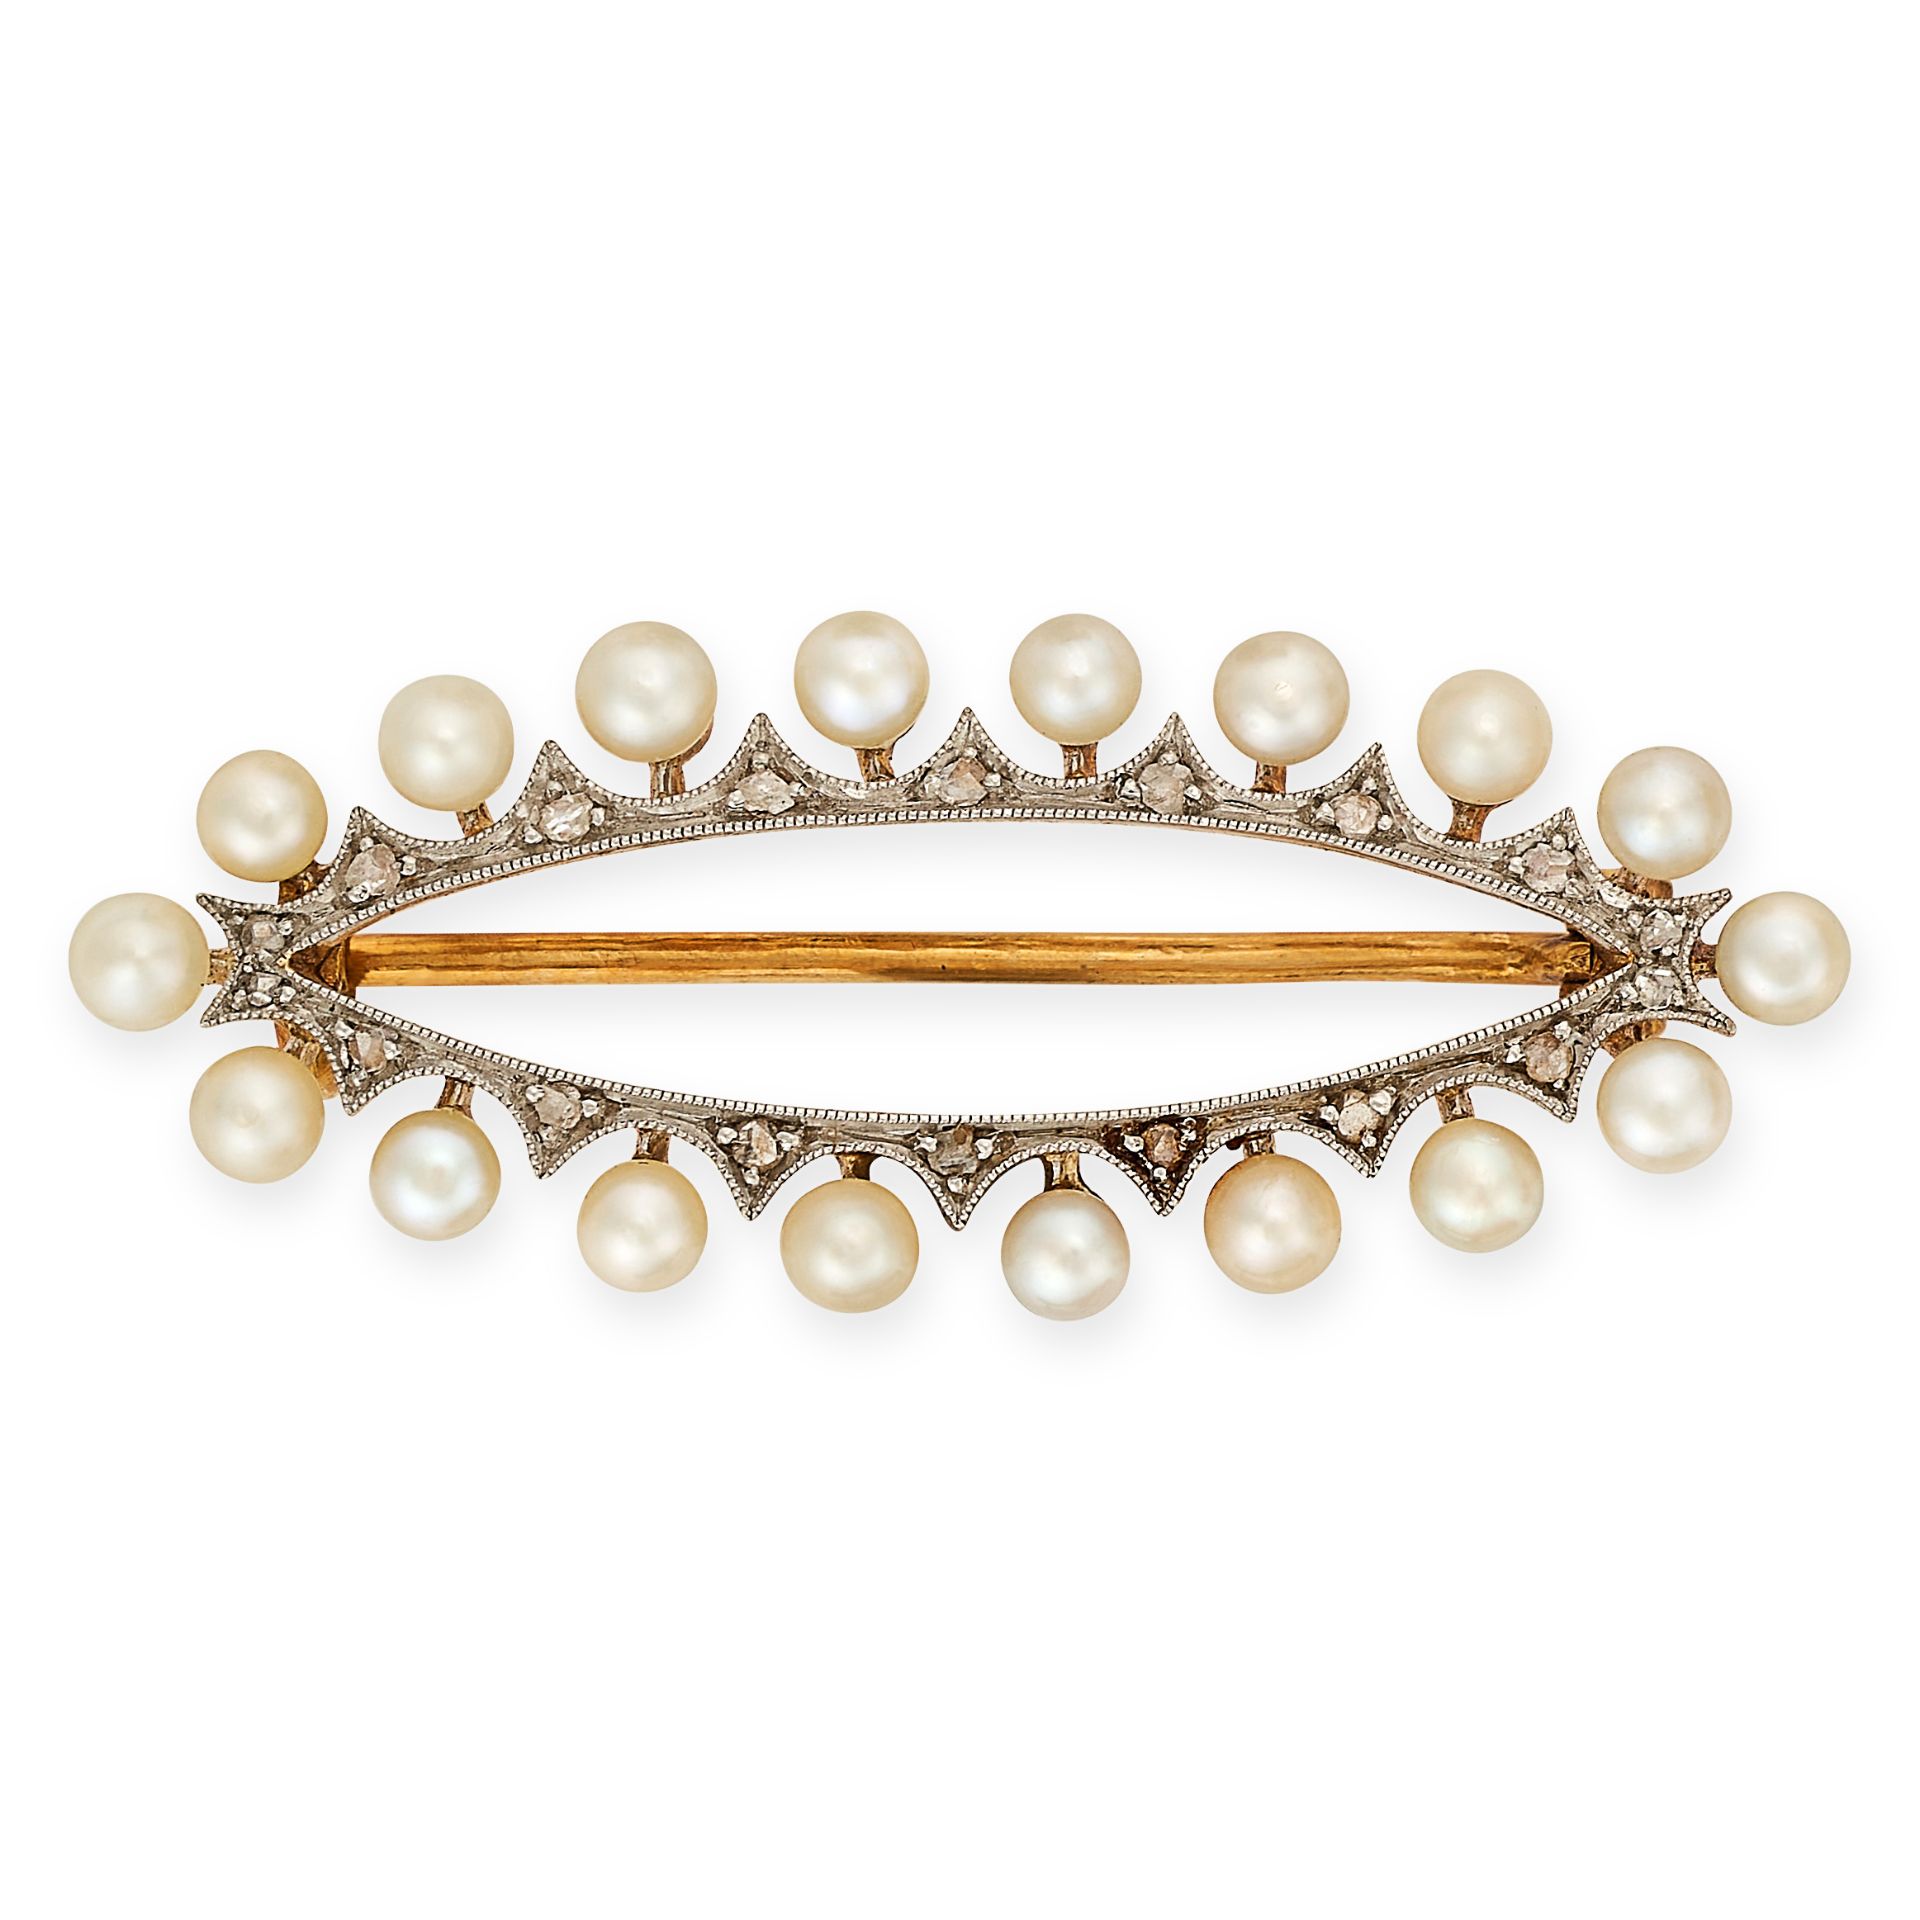 AN ART DECO PEARL AND DIAMOND BROOCH formed in a marquise shape set with a border of pearls to a